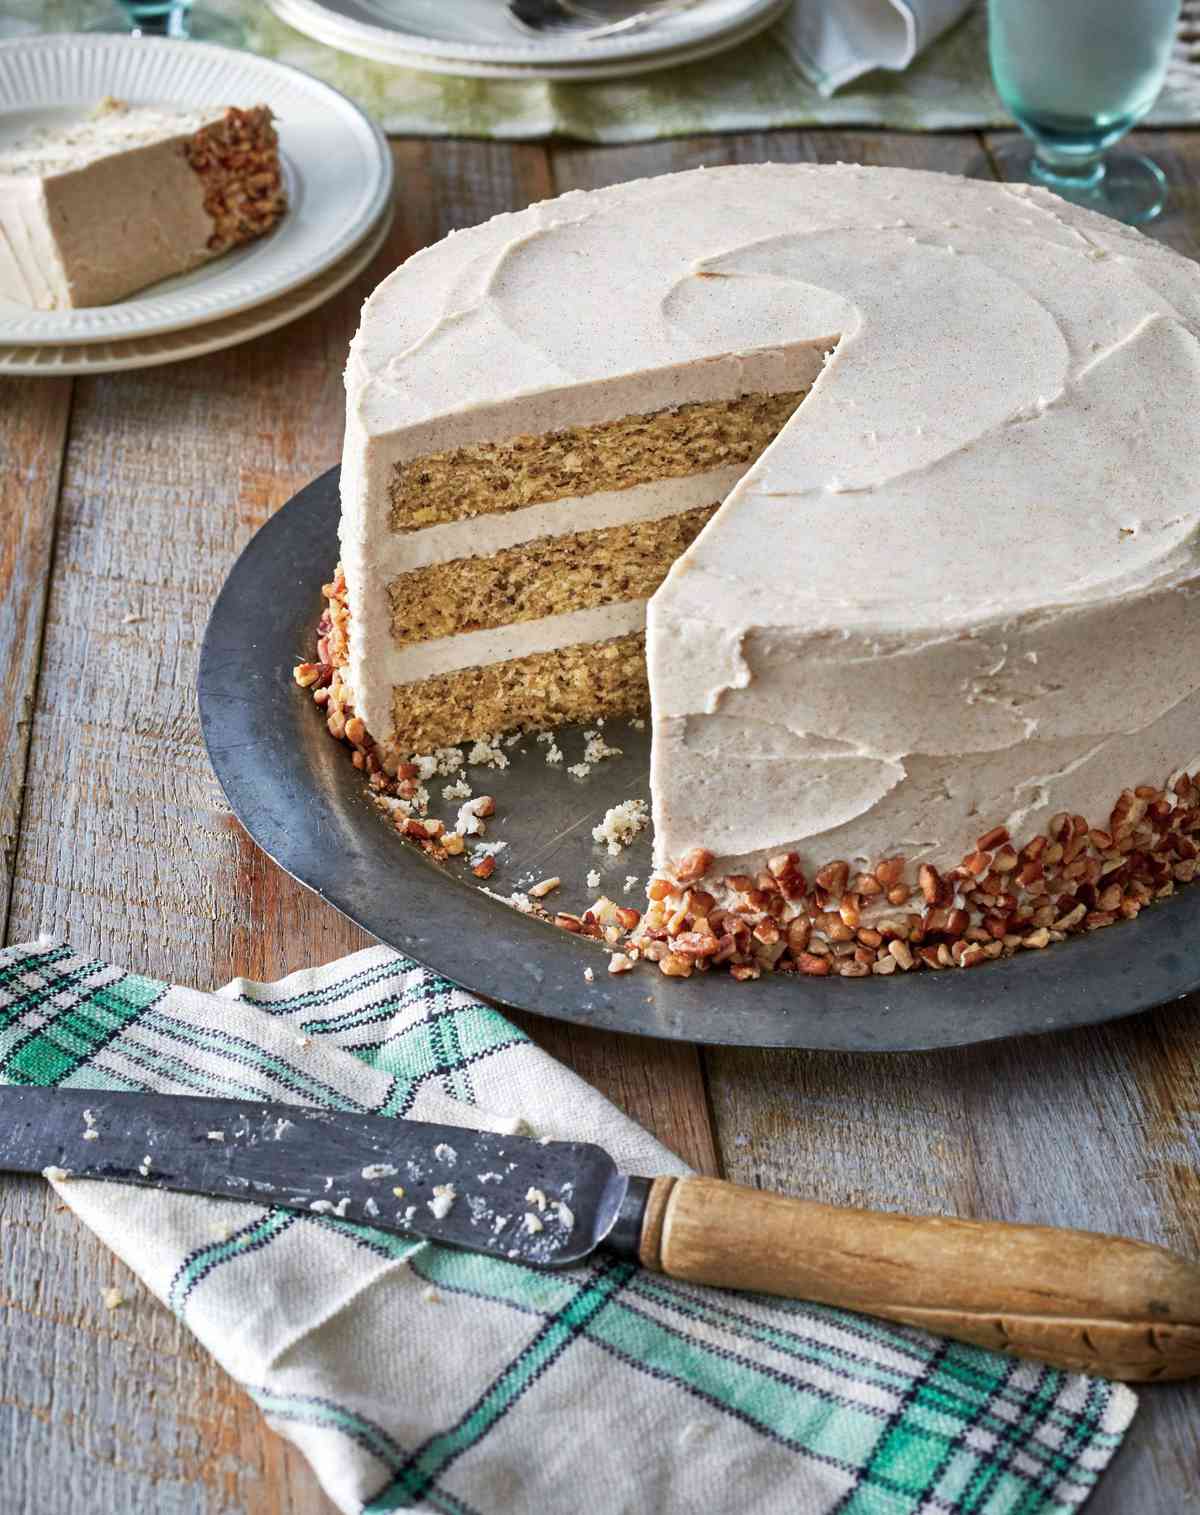 Butter Pecan Layer Cake with Browned Butter Frosting